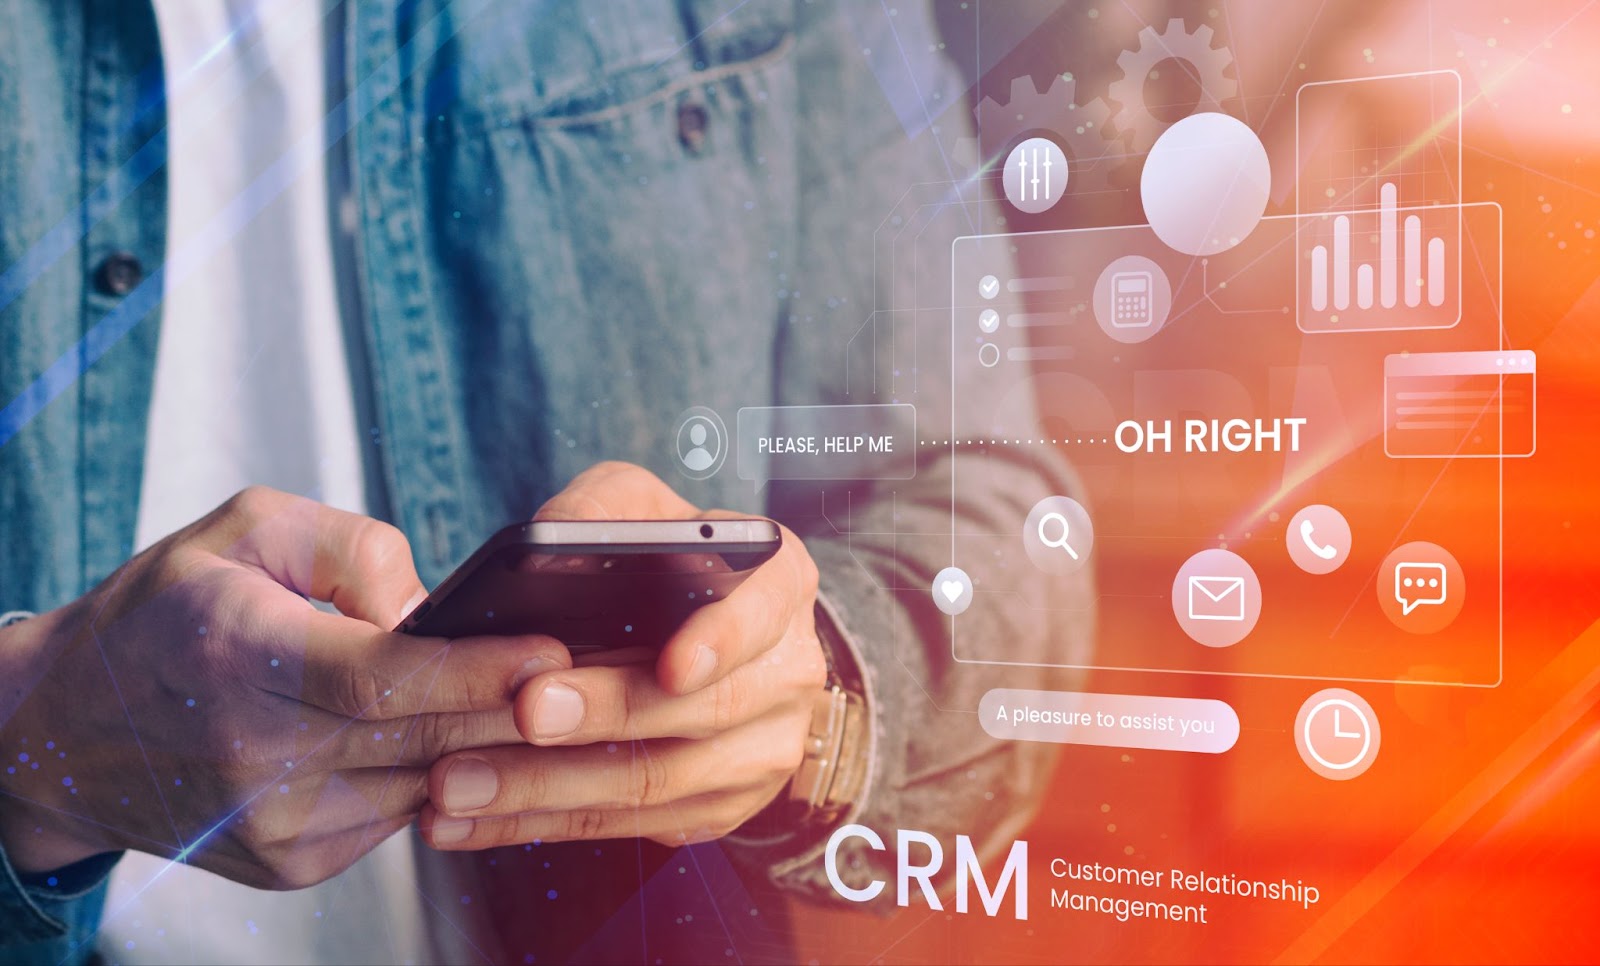 CRM concept: a man in a blue jeans shirt holding a smartphone